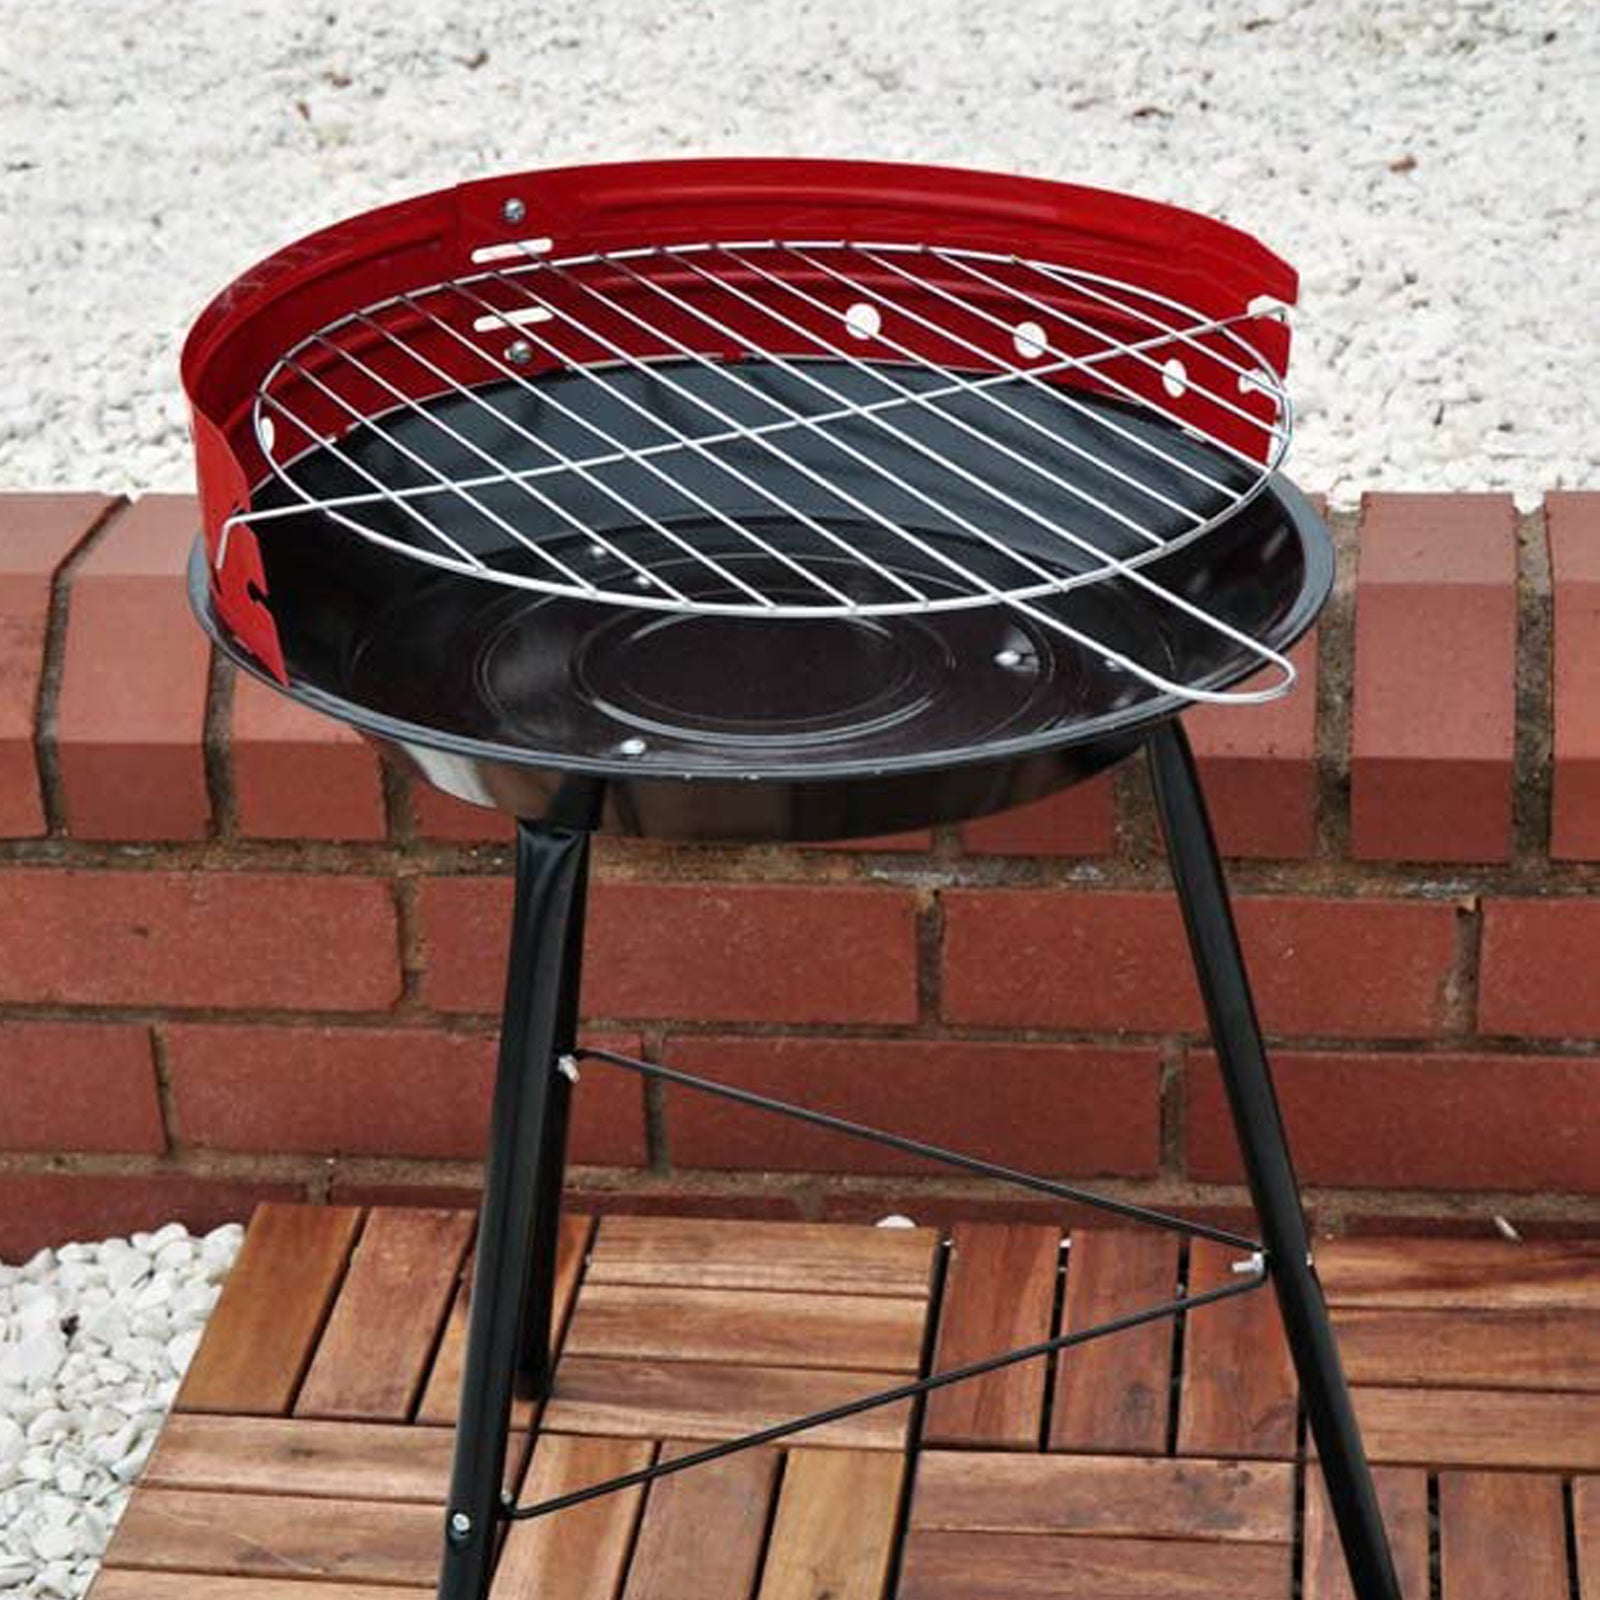 AMOS 14" Open Top BBQ Grill